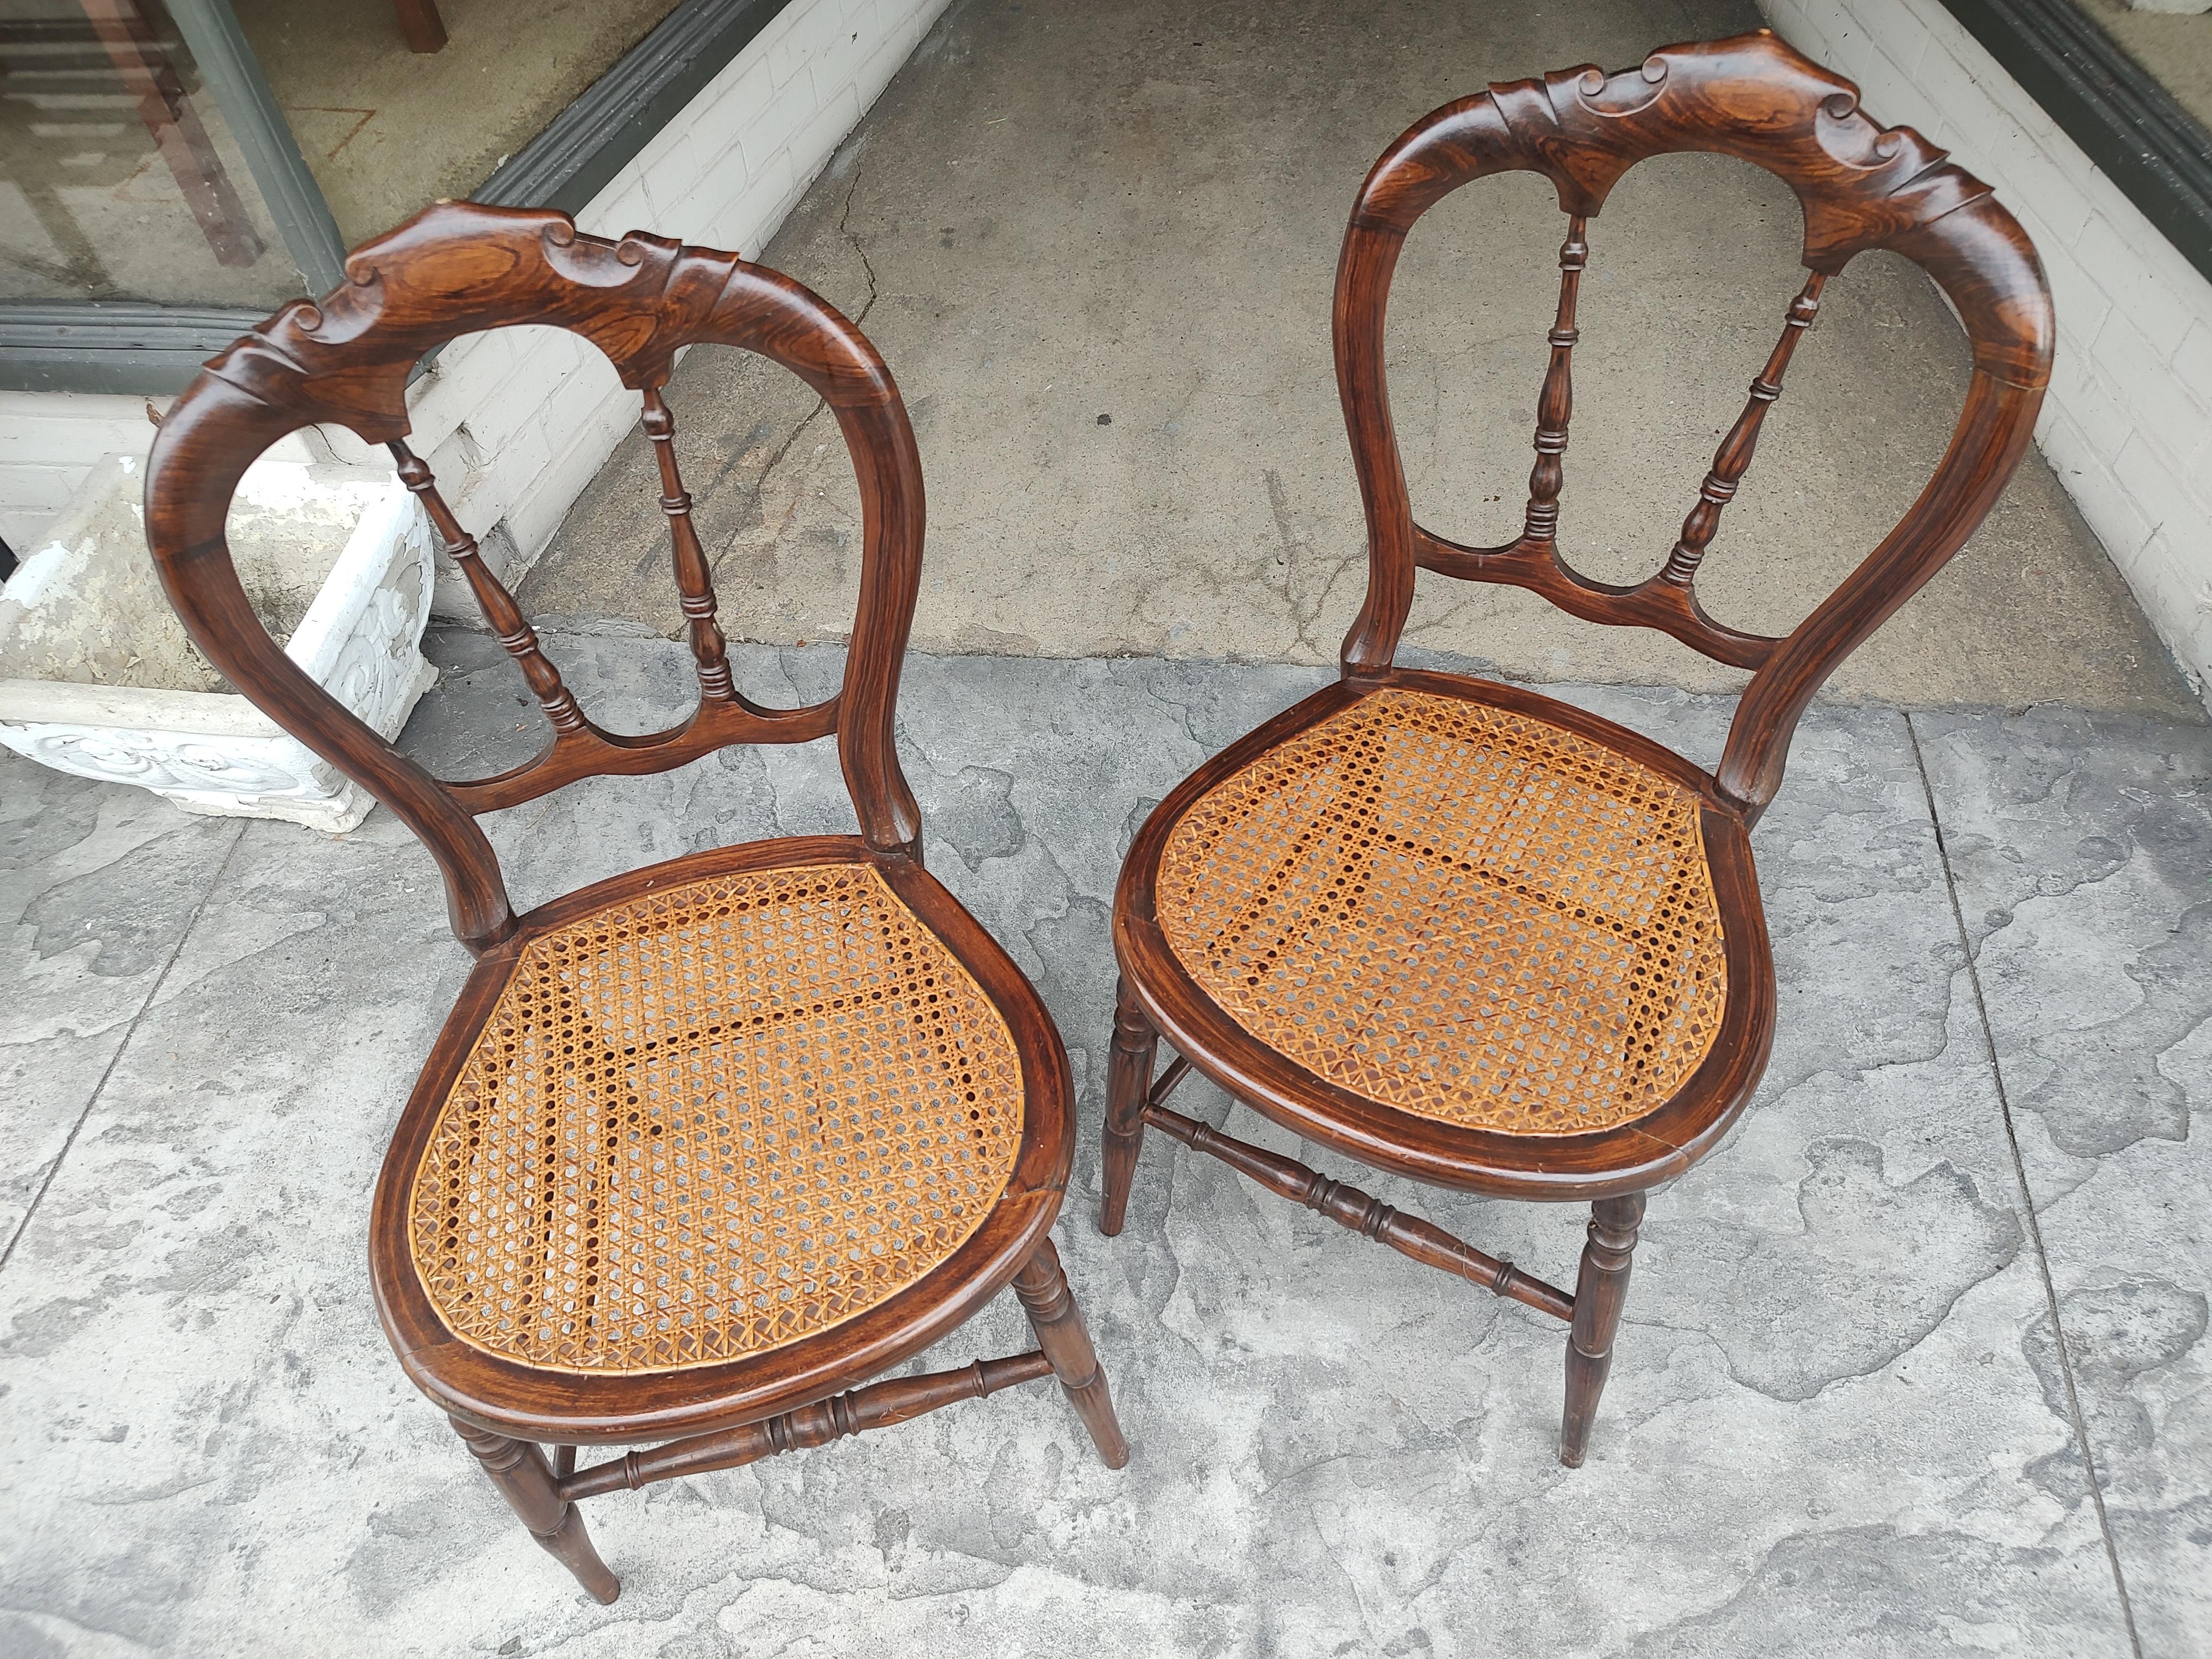 Pair of Mid-19th Century Grain Painted Rosewood Chiavari Chairs with Caned Seats For Sale 4